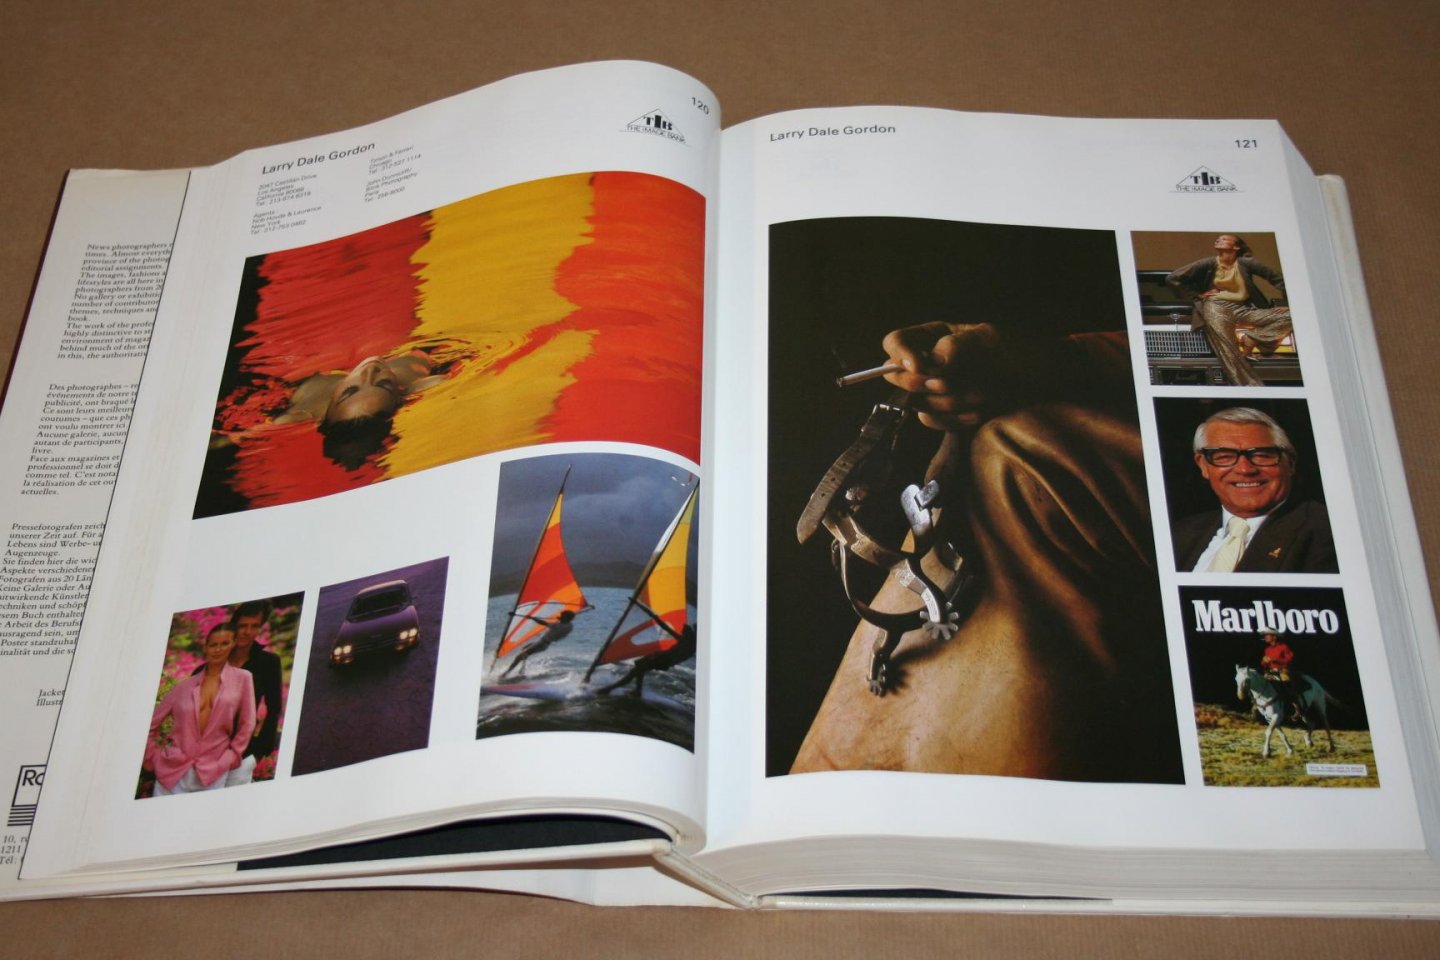  - Art Directors Index to Photographers No. 6 --   483 photographers - 20 countries